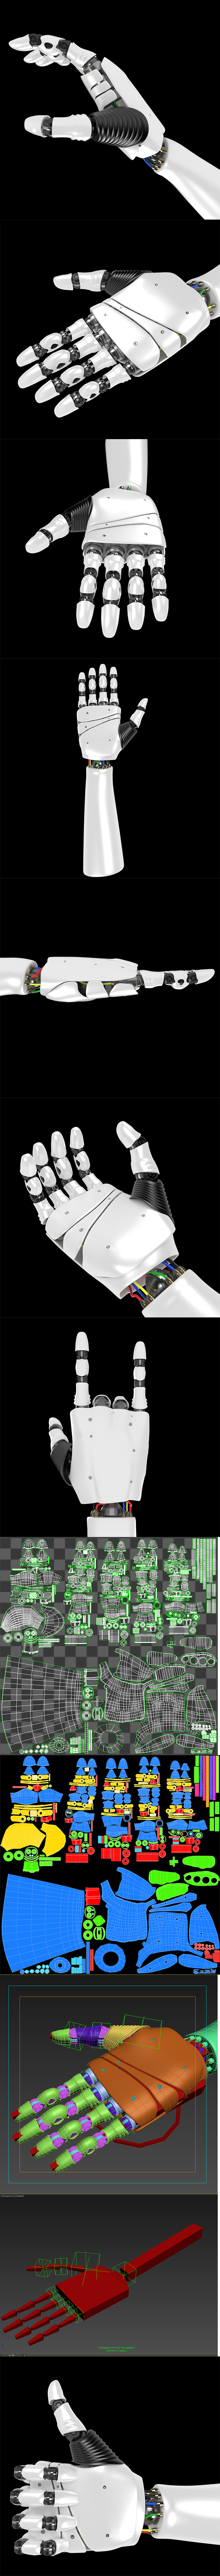 Robot Hand rigged - 3Docean 20990153